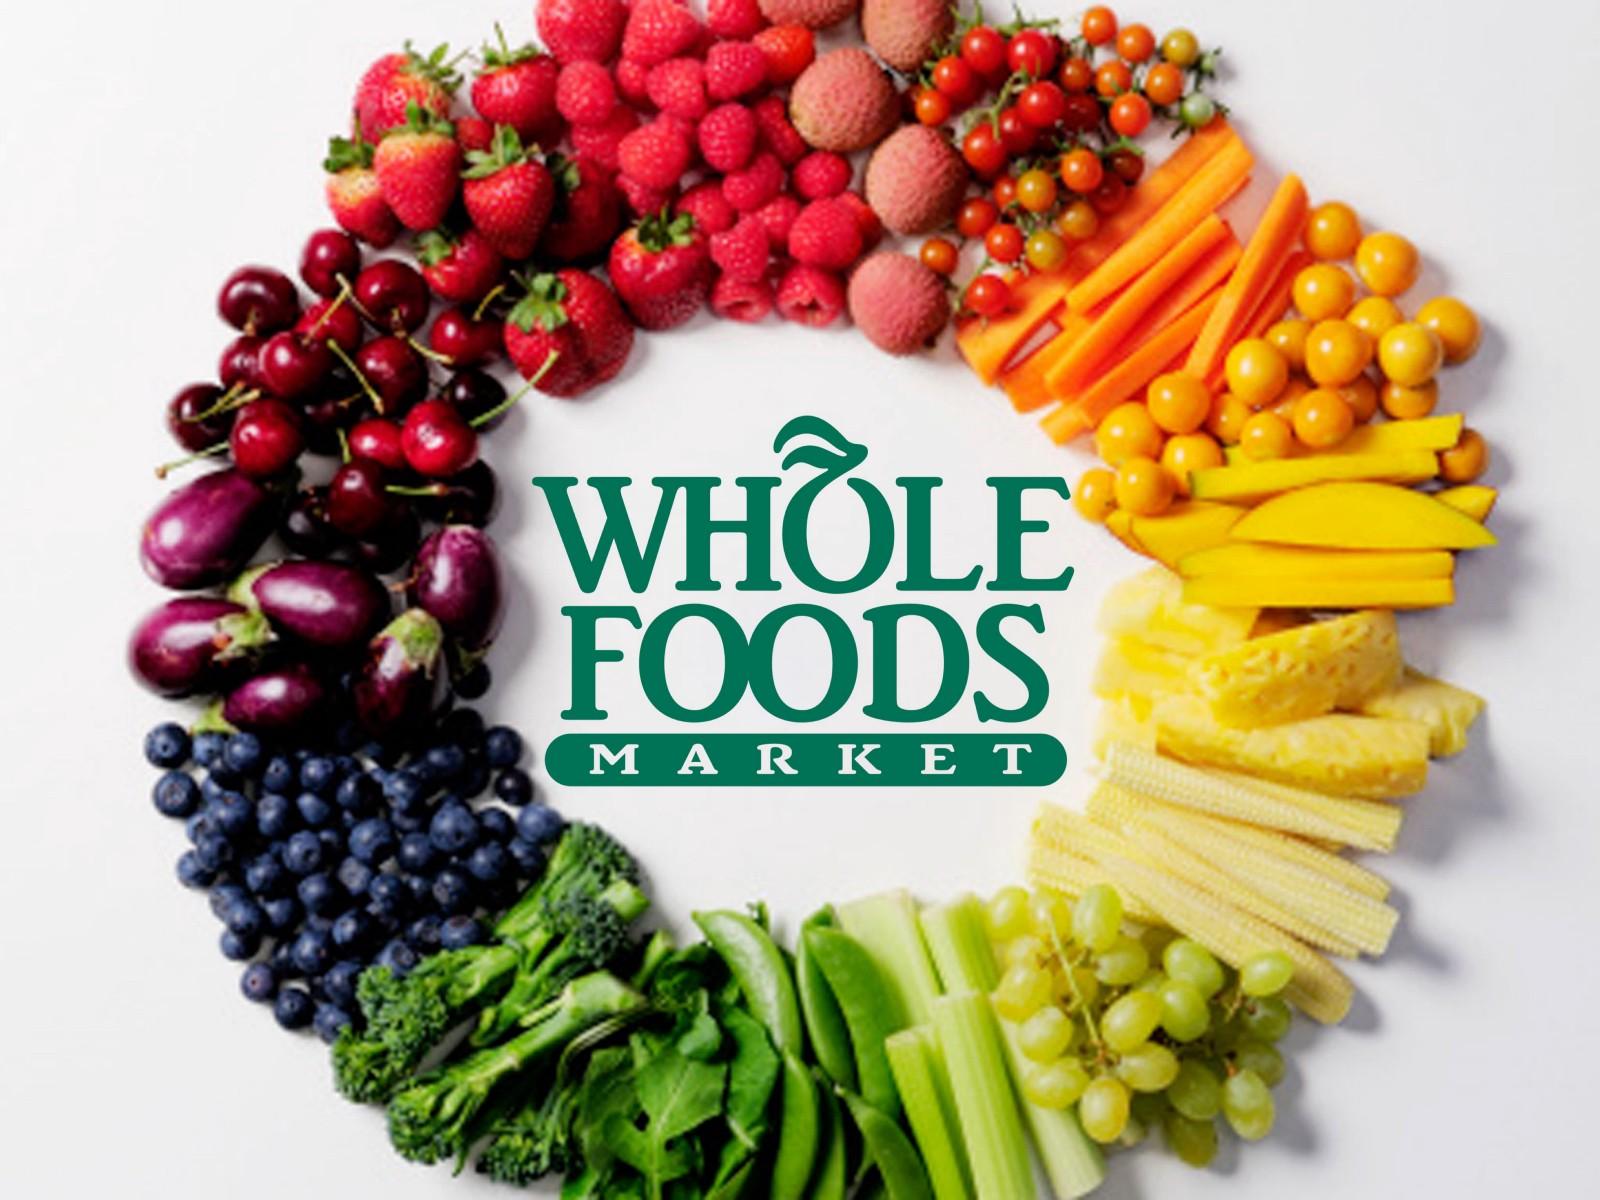 How Whole Foods Went From Undervalued To Overvalued